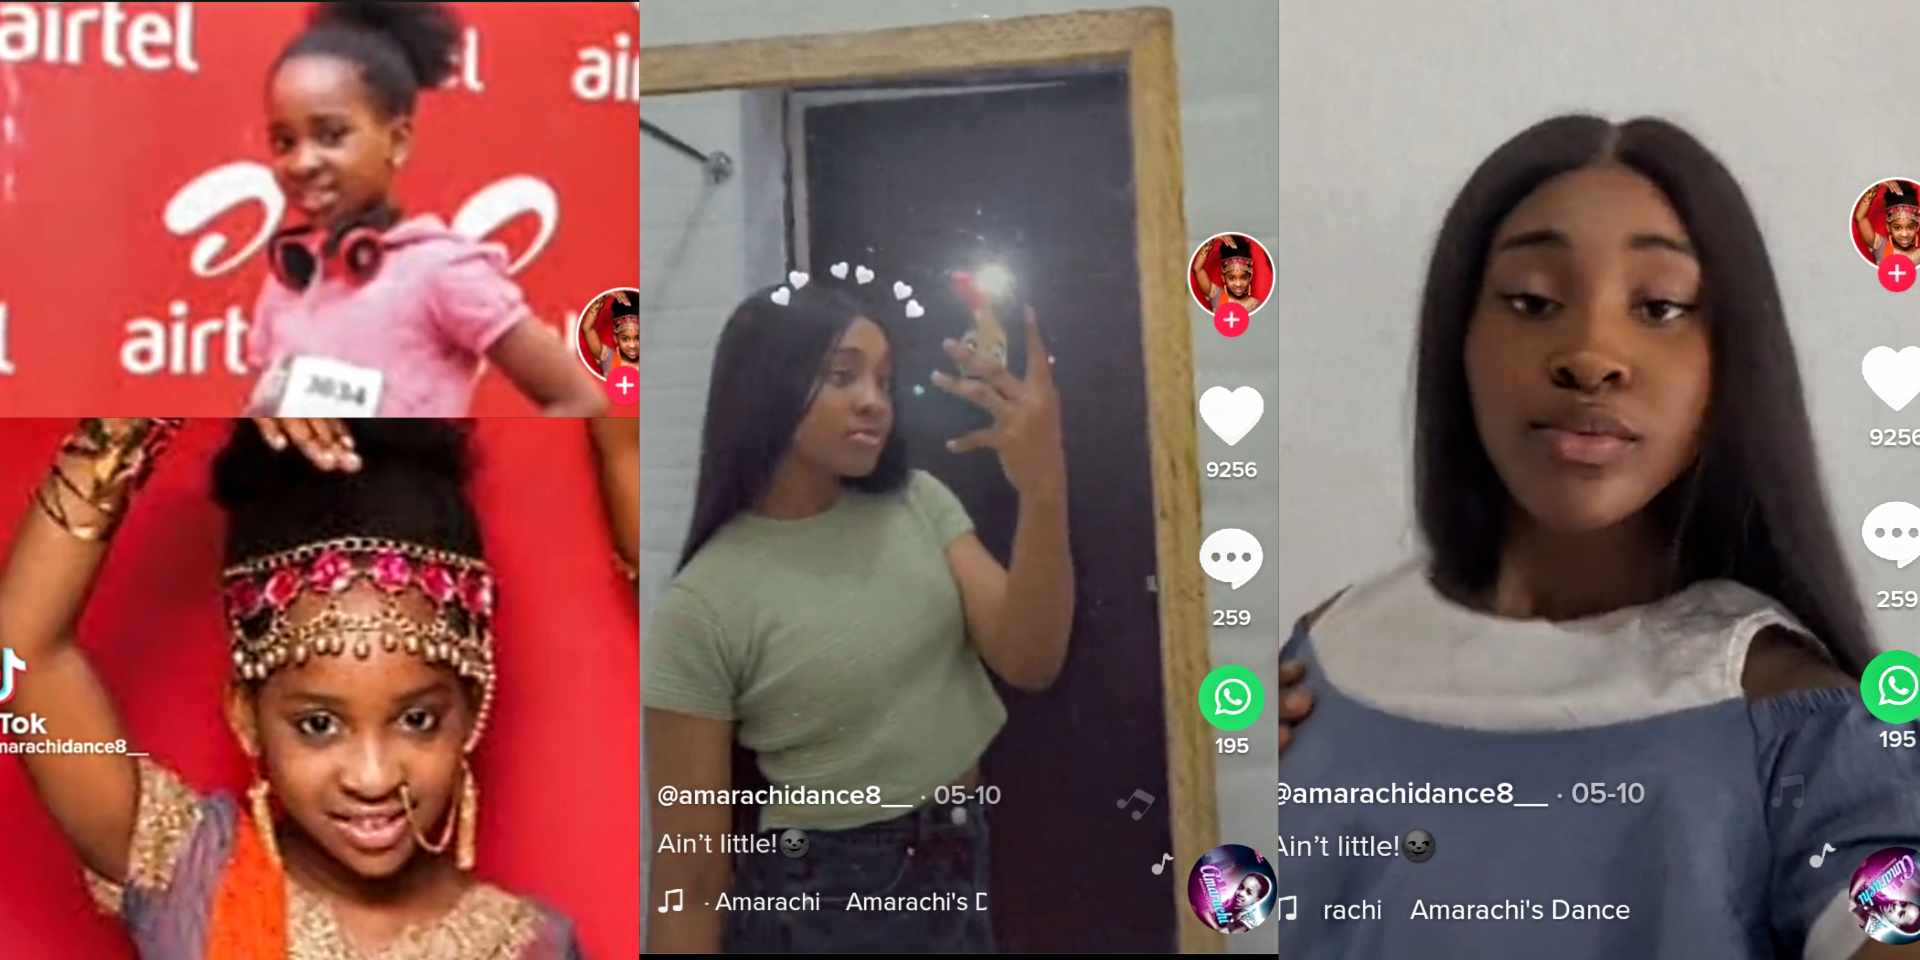 Little Amarachi who won Airtel dance contest years ago wows netizens with transformation photos [Video]